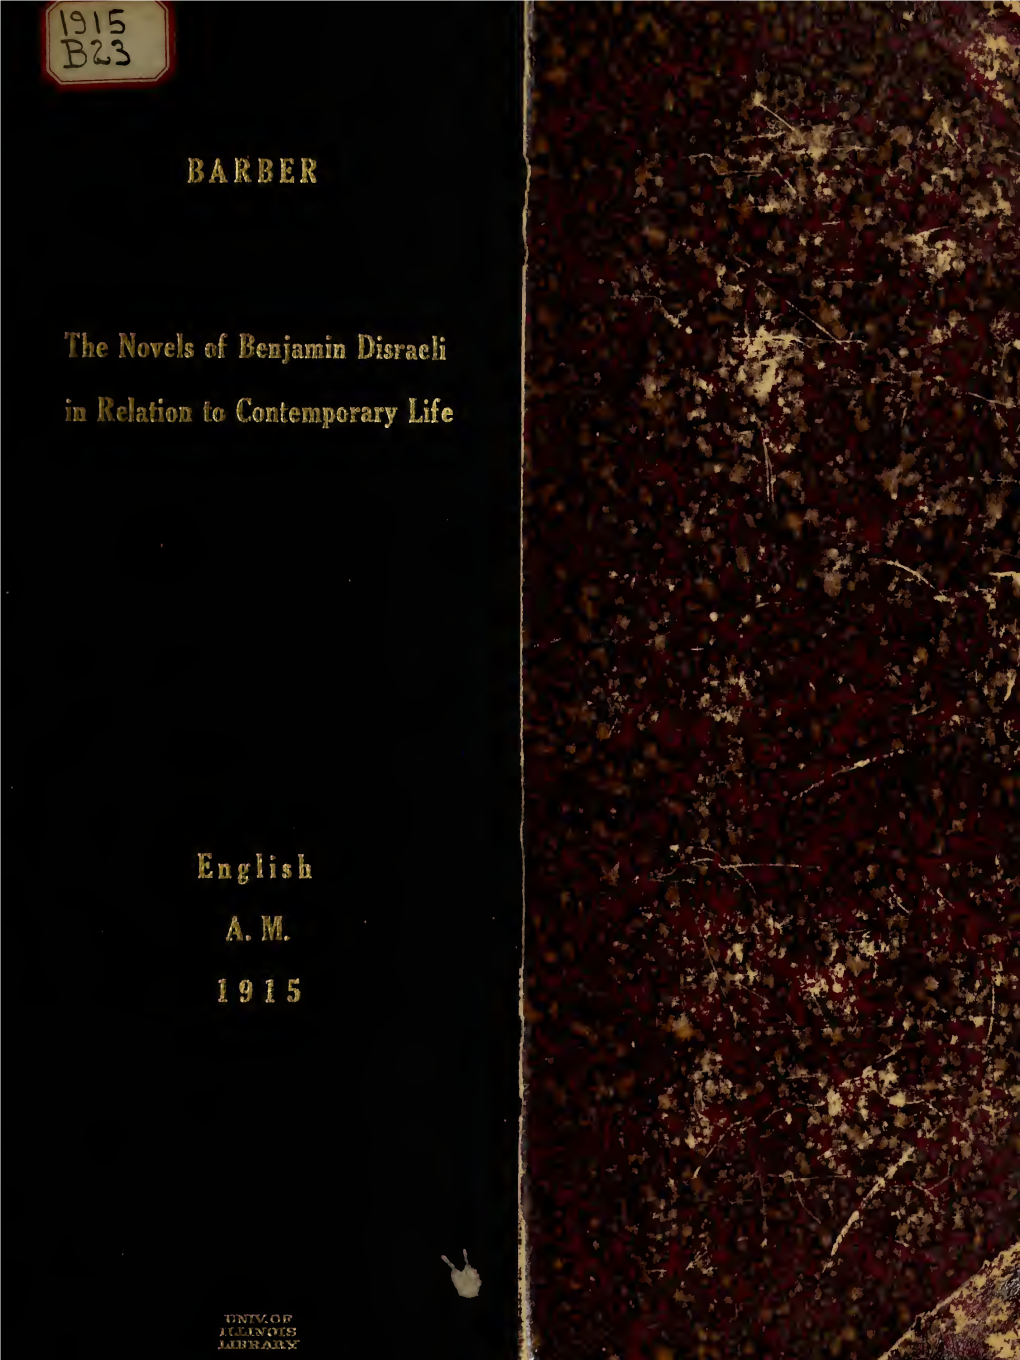 The Novels of Benjamin Disraeli in Relation to Contemporary Life